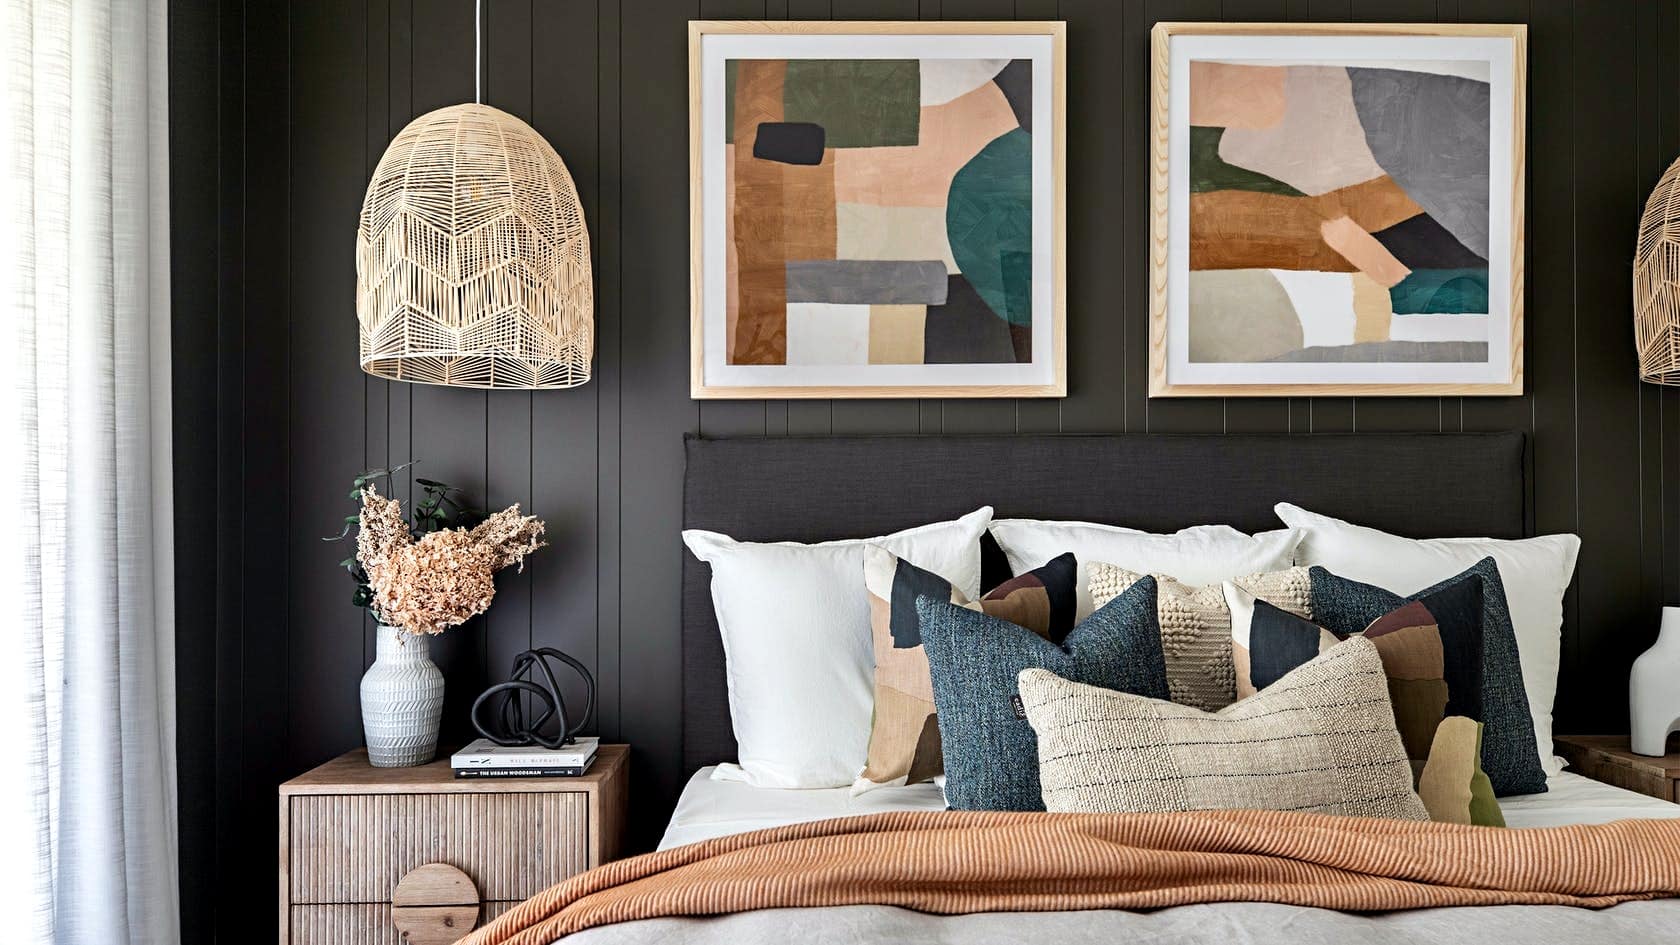 Should You Hang Art Above Your Bed? 5 Things To Consider When Decorating With Art